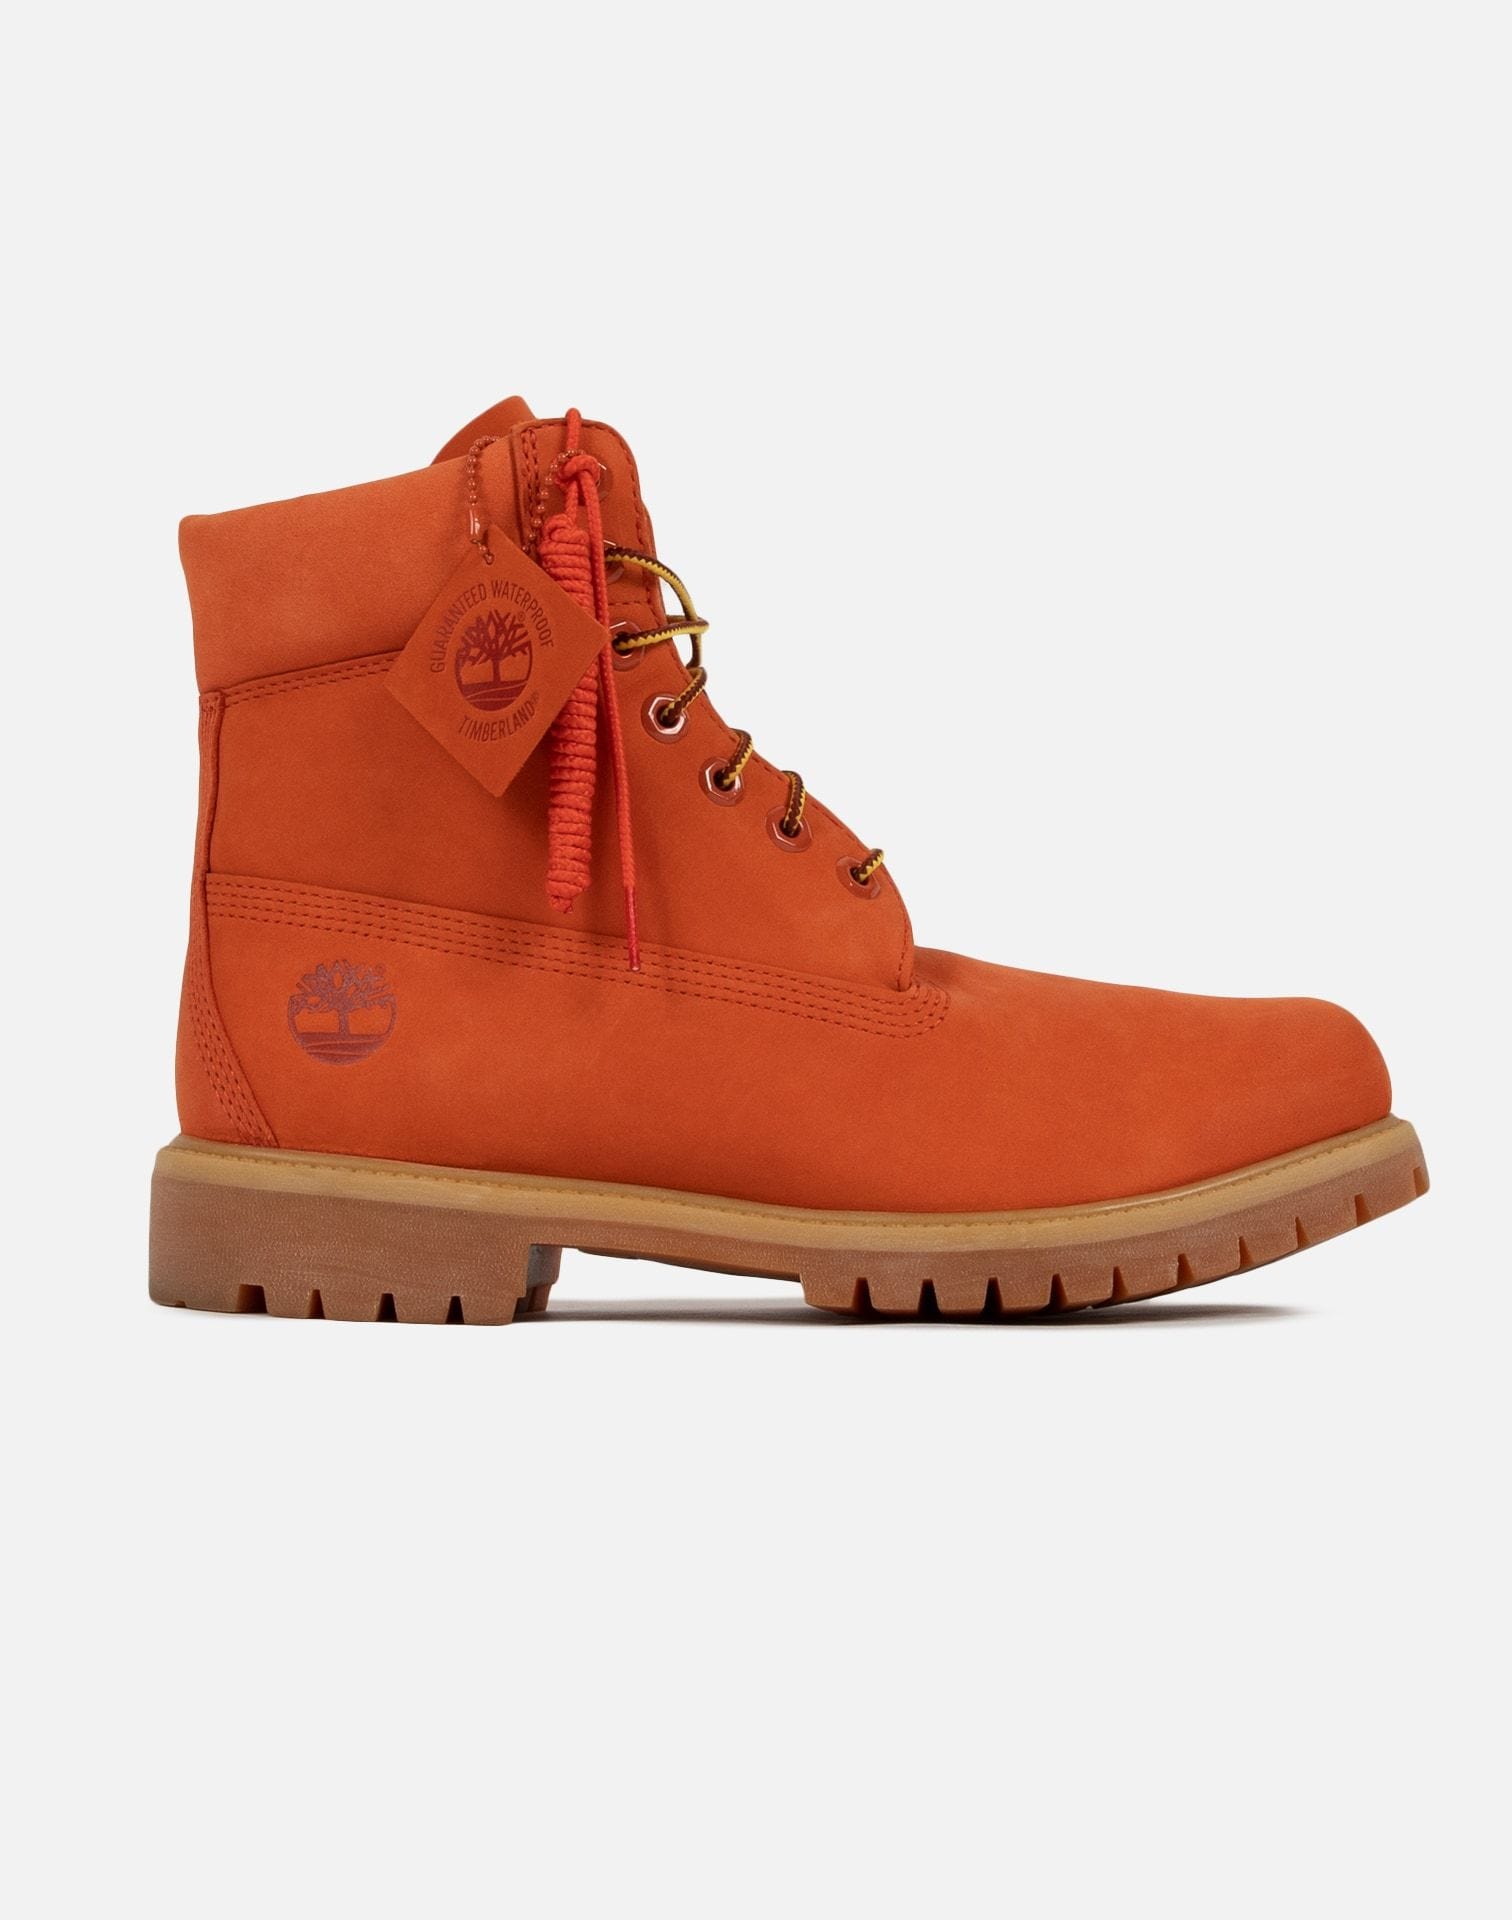 timberlands sold near me